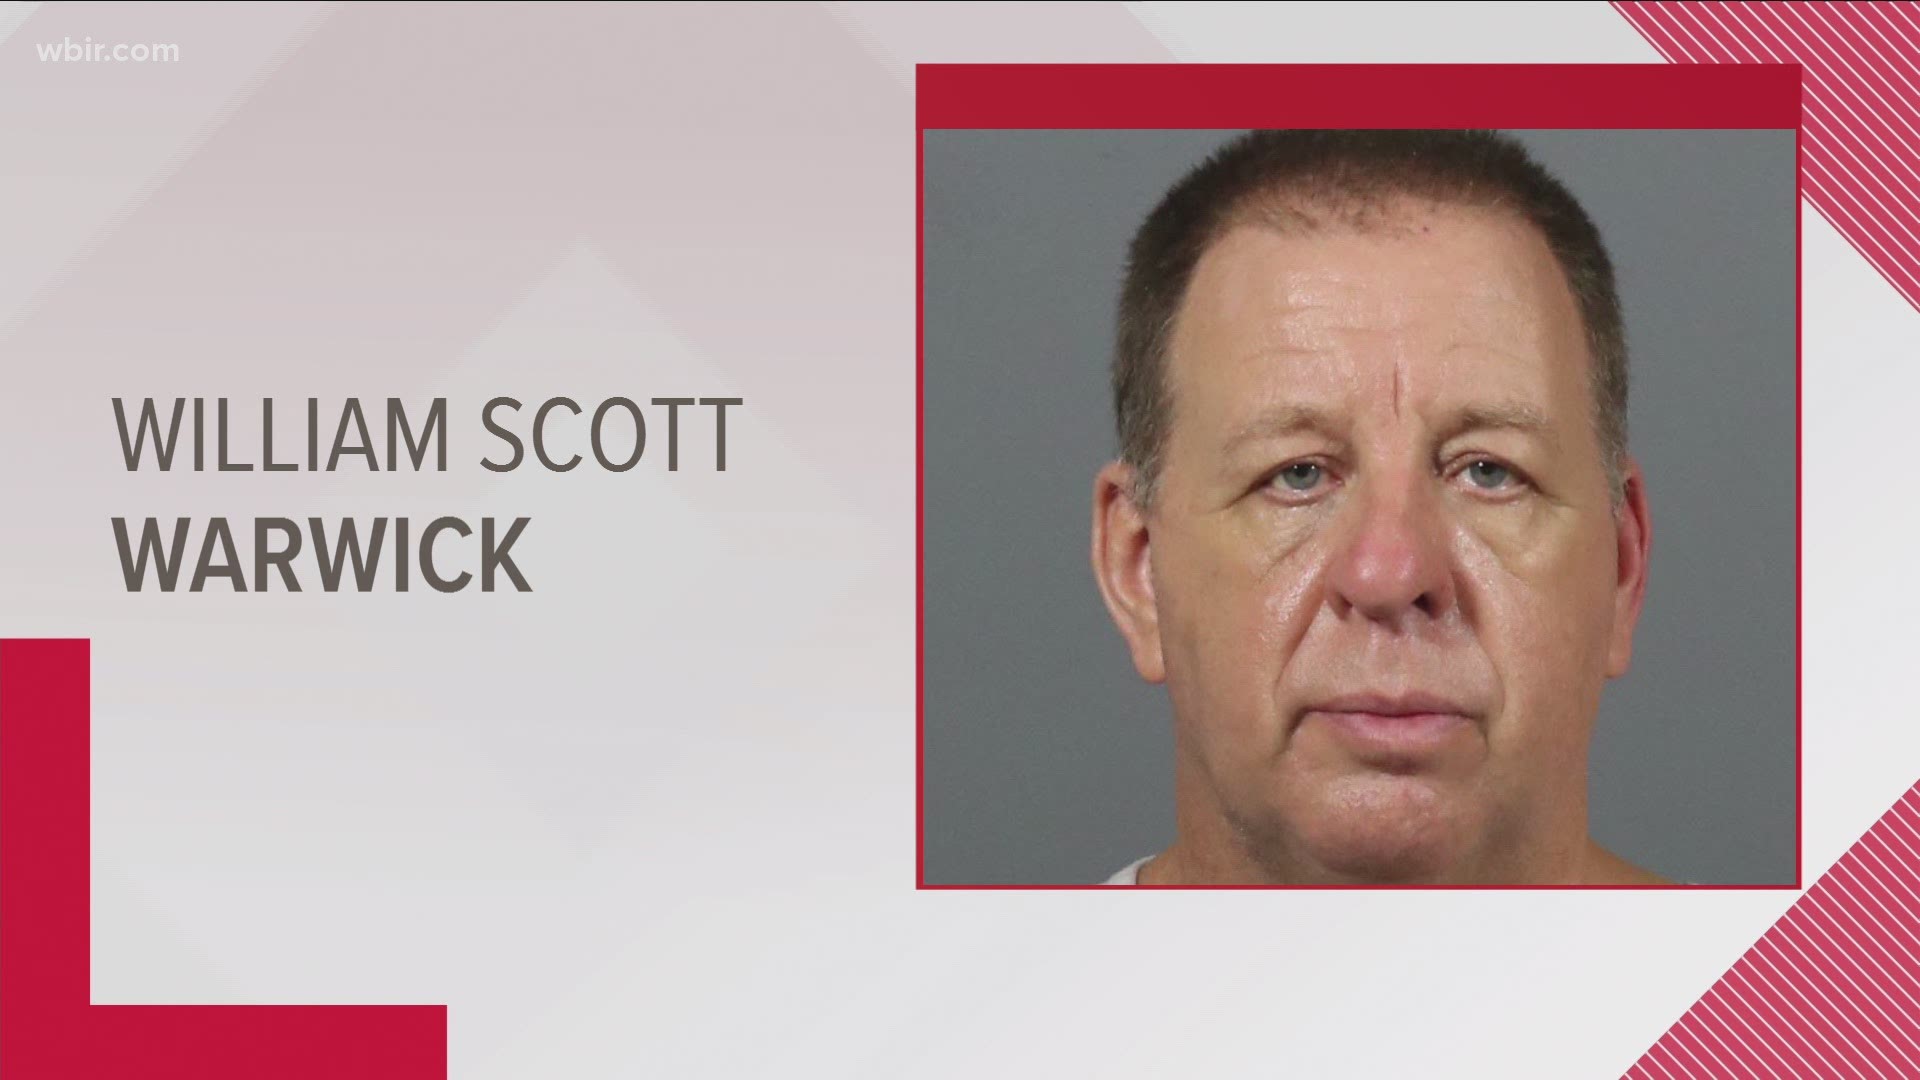 KFD Capt. Scott Warwick is accused of sex crimes involving a minor child in Knoxville. He's filed paperwork to retire.